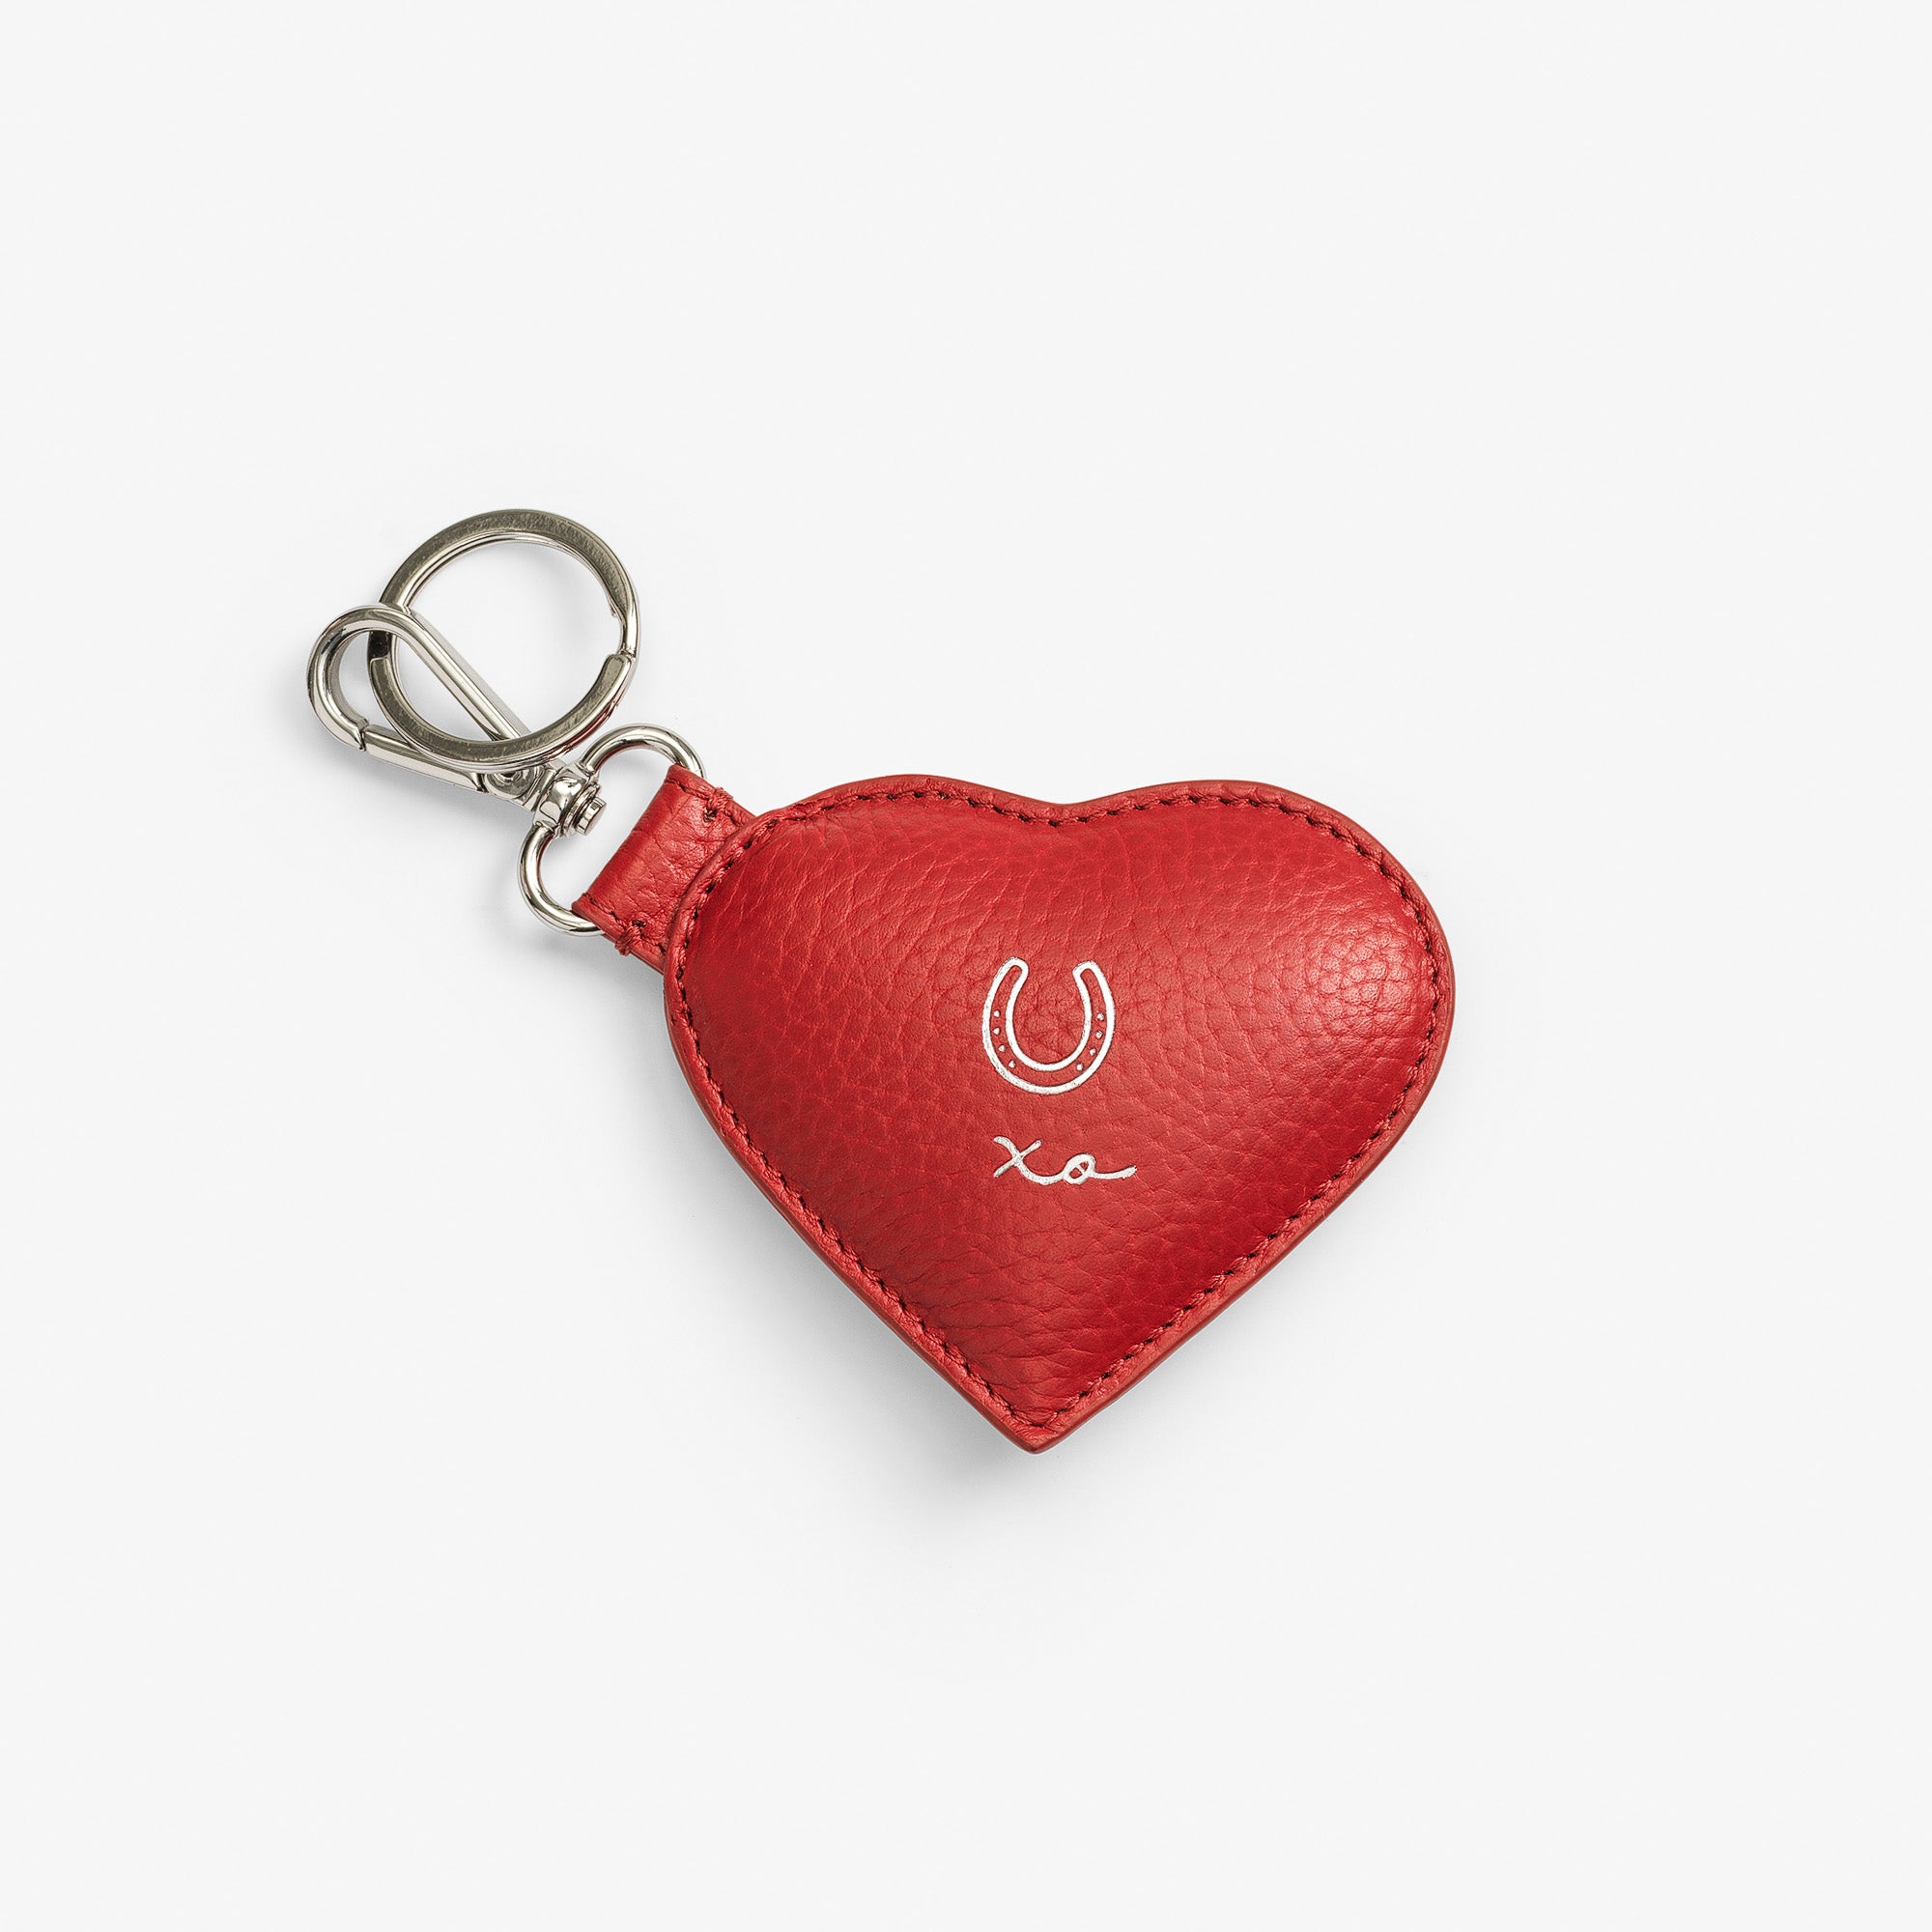 Love & Heart Leather Key Ring